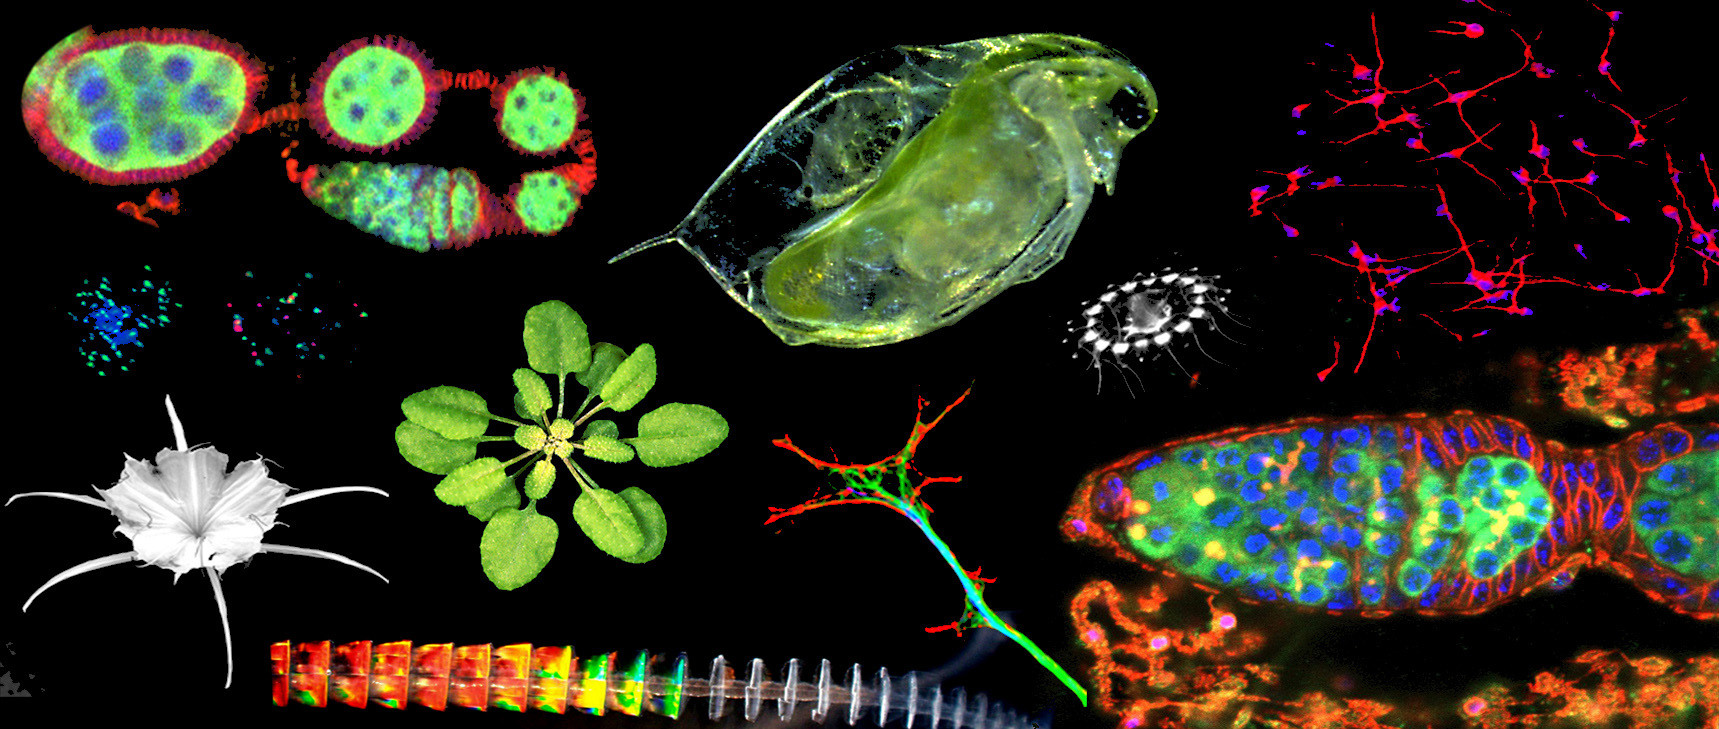 collage of Biology imagery